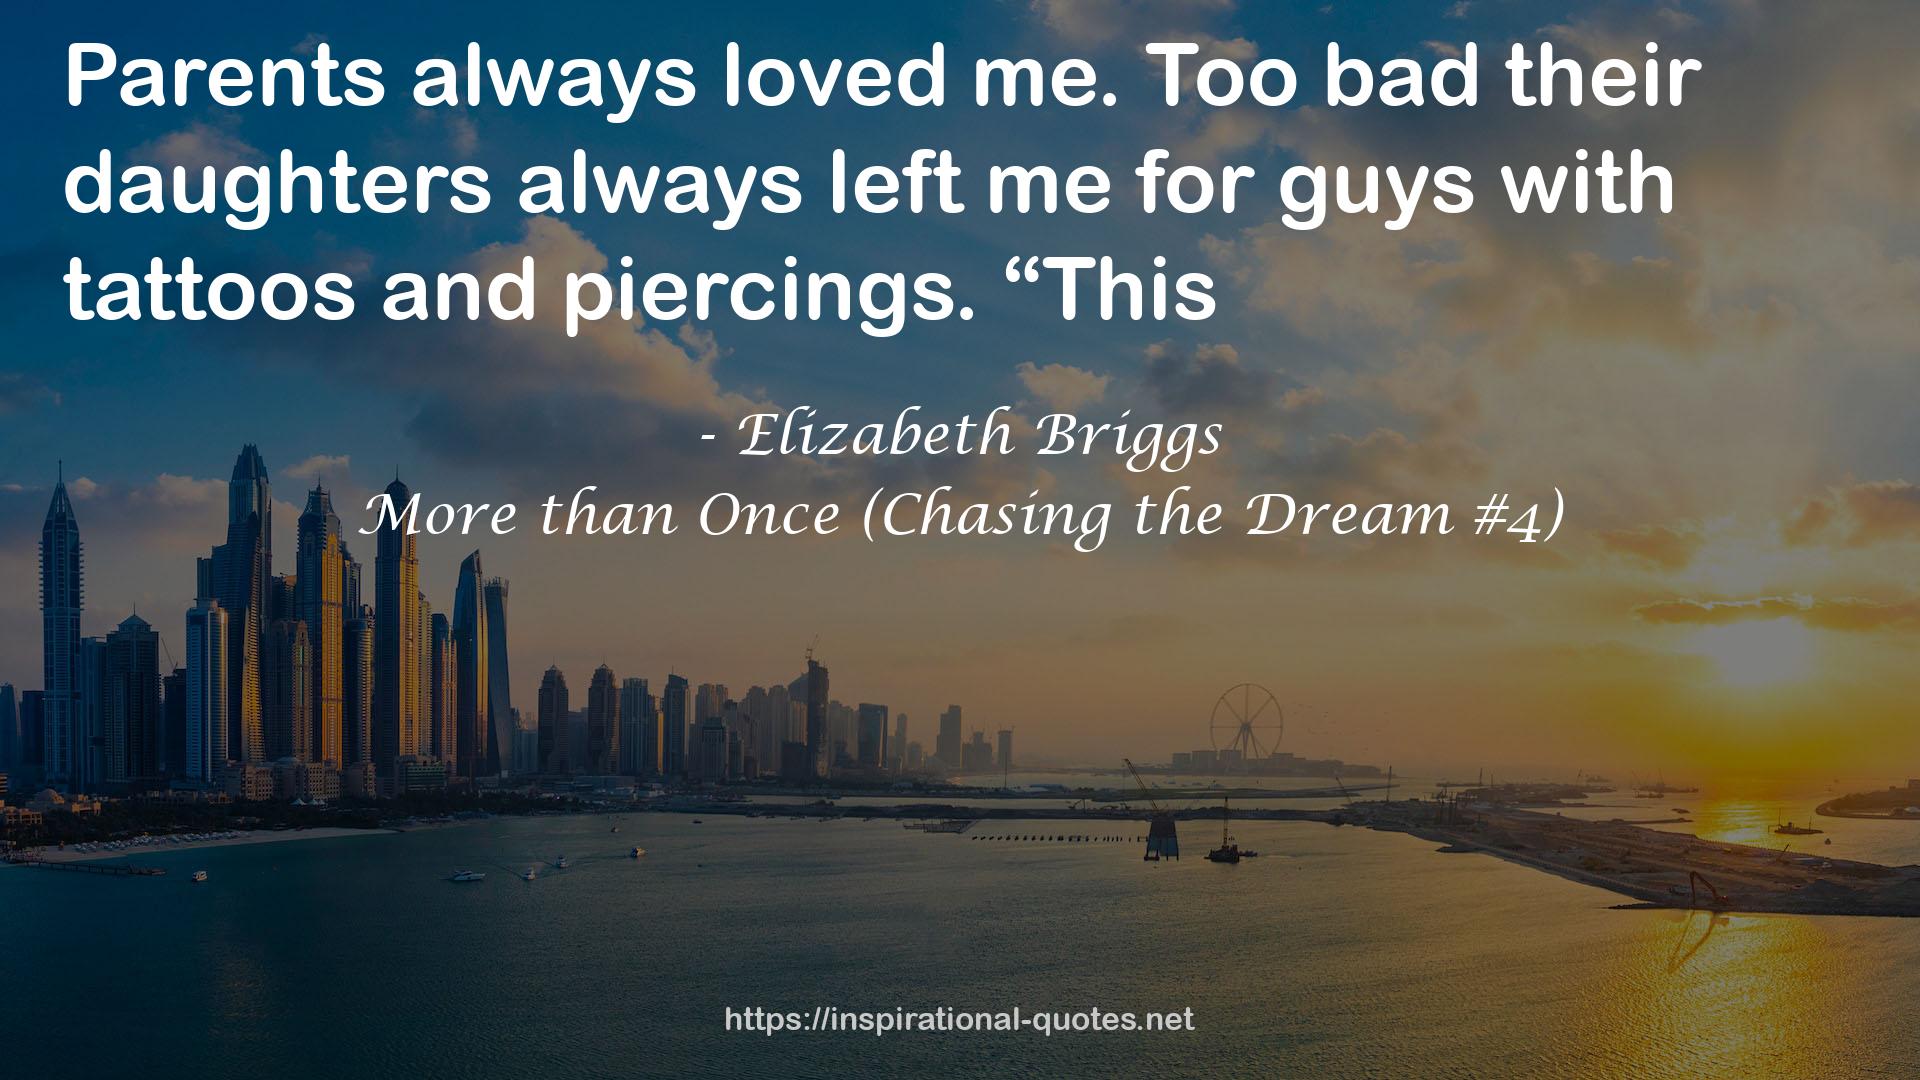 More than Once (Chasing the Dream #4) QUOTES